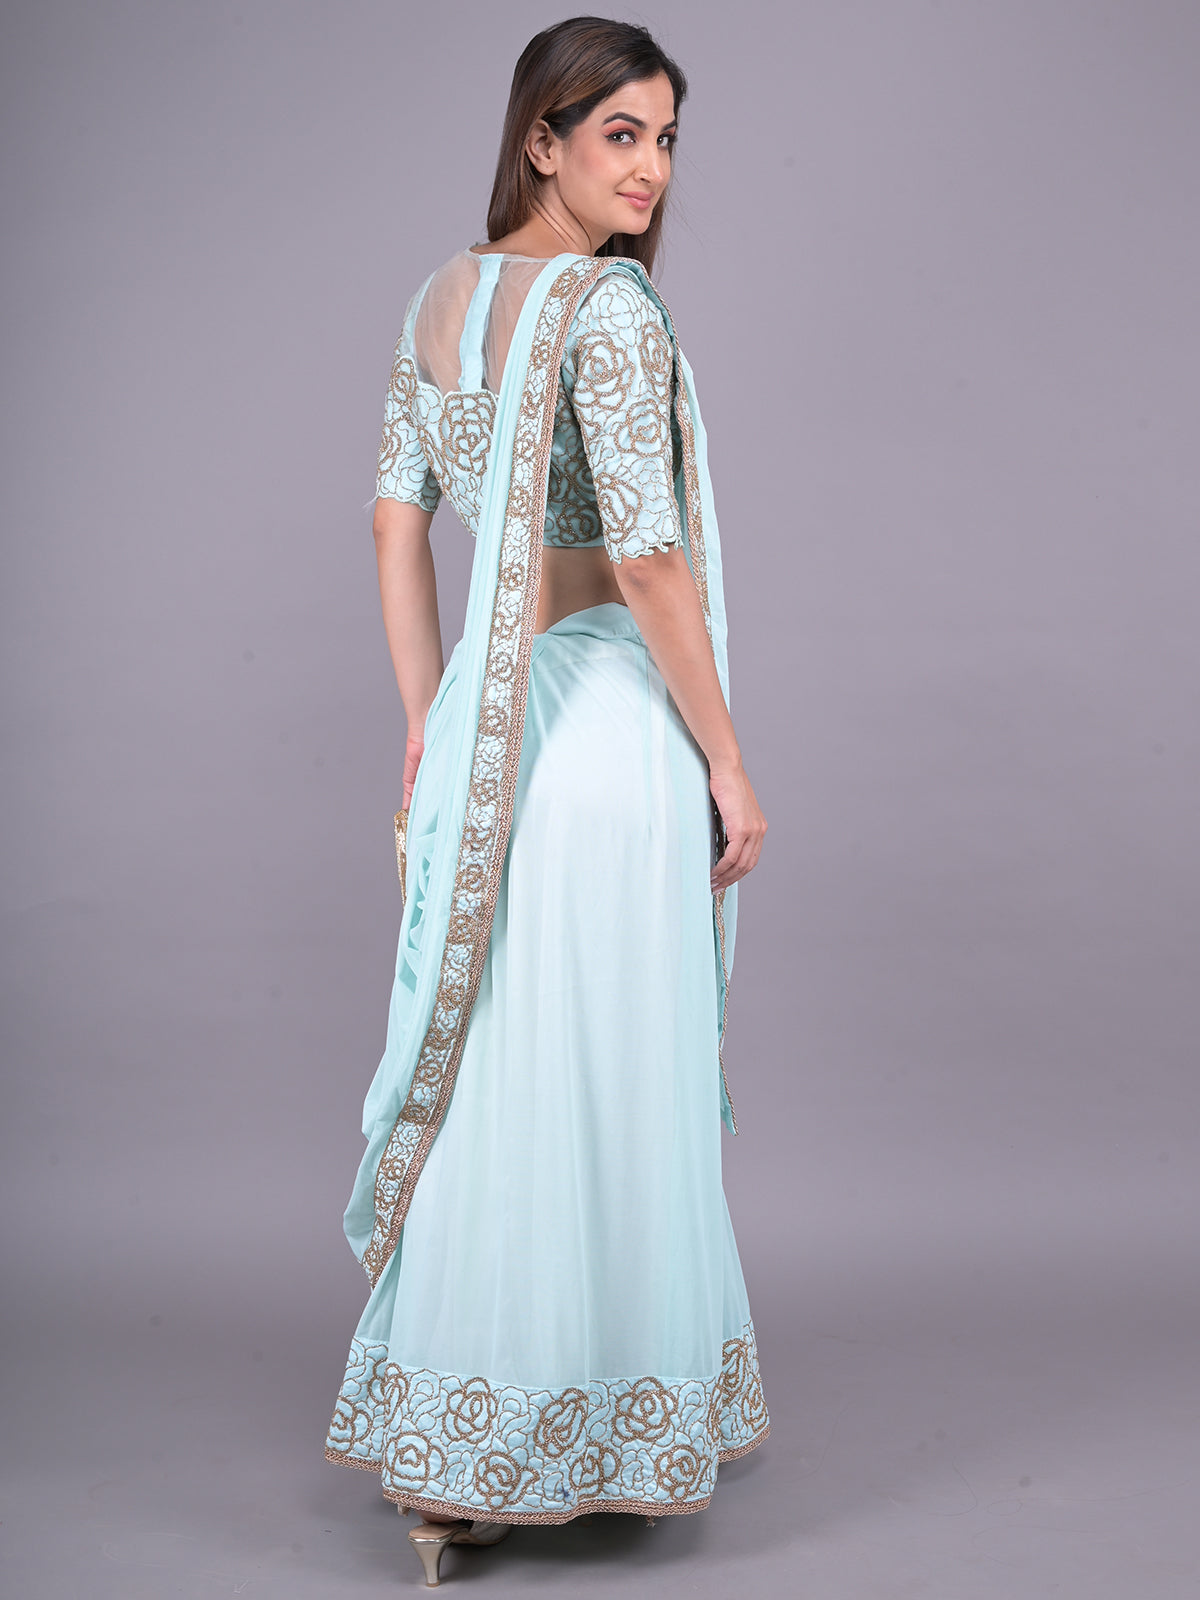 Odette Light Blue Embroidered Ready-To-Wear Saree With Stitched Blouse For Women